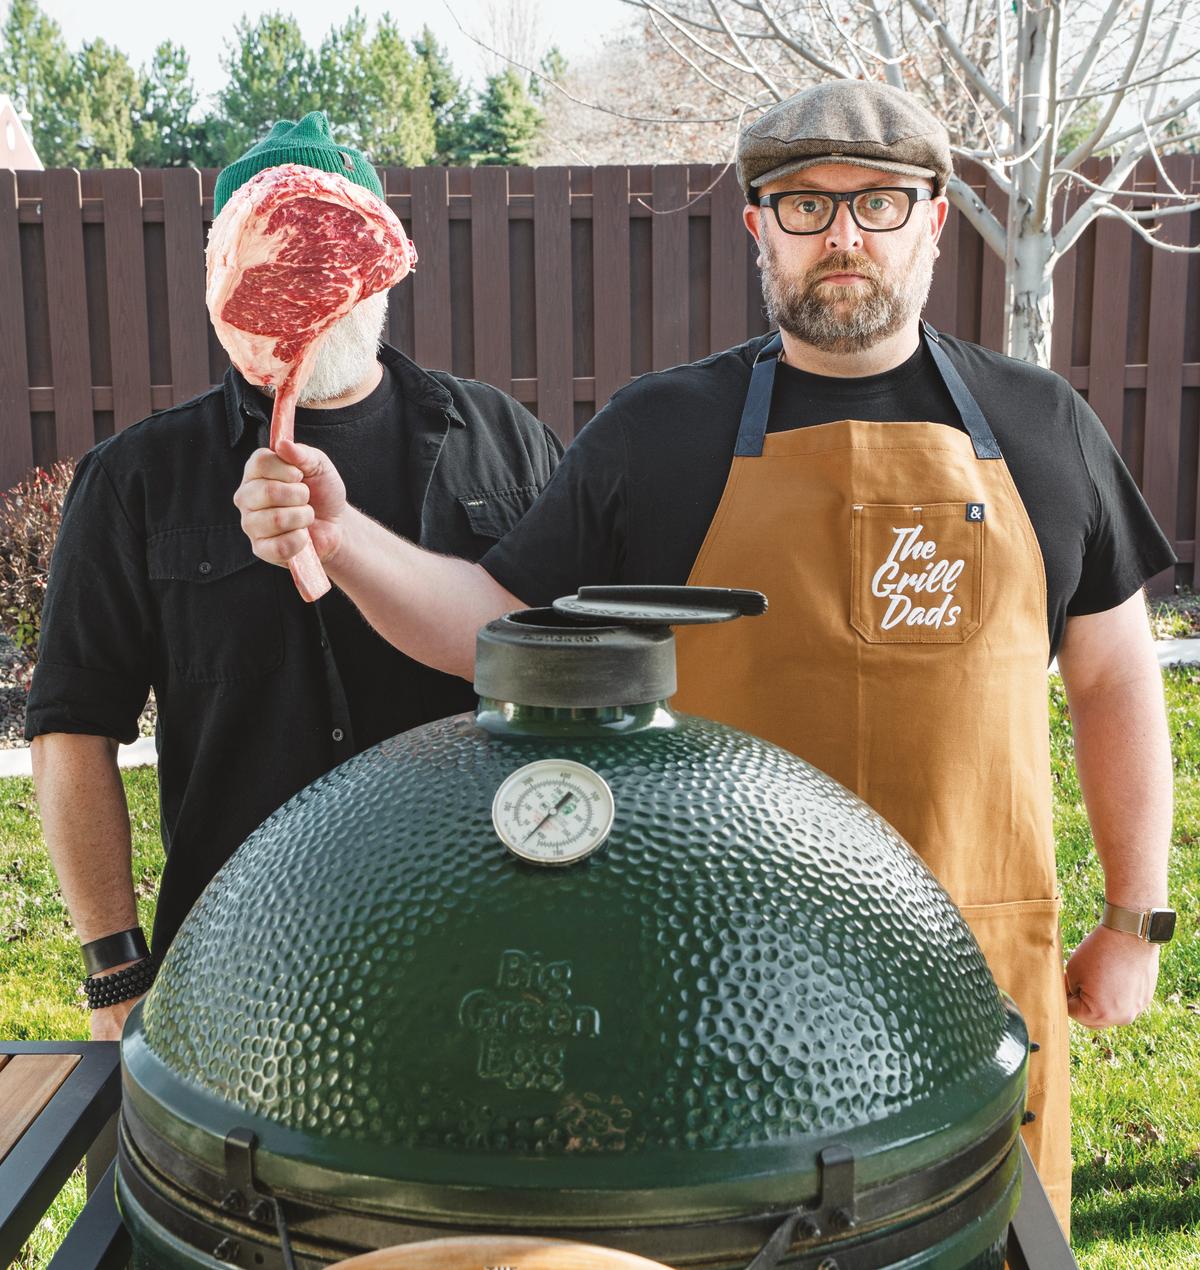 The Grill Dads's repertoire includes Tomahawk steaks and other hefty meats, yes—but also grilled cabbage, breakfast dishes, and other unexpected fare. (Ken Goodman)